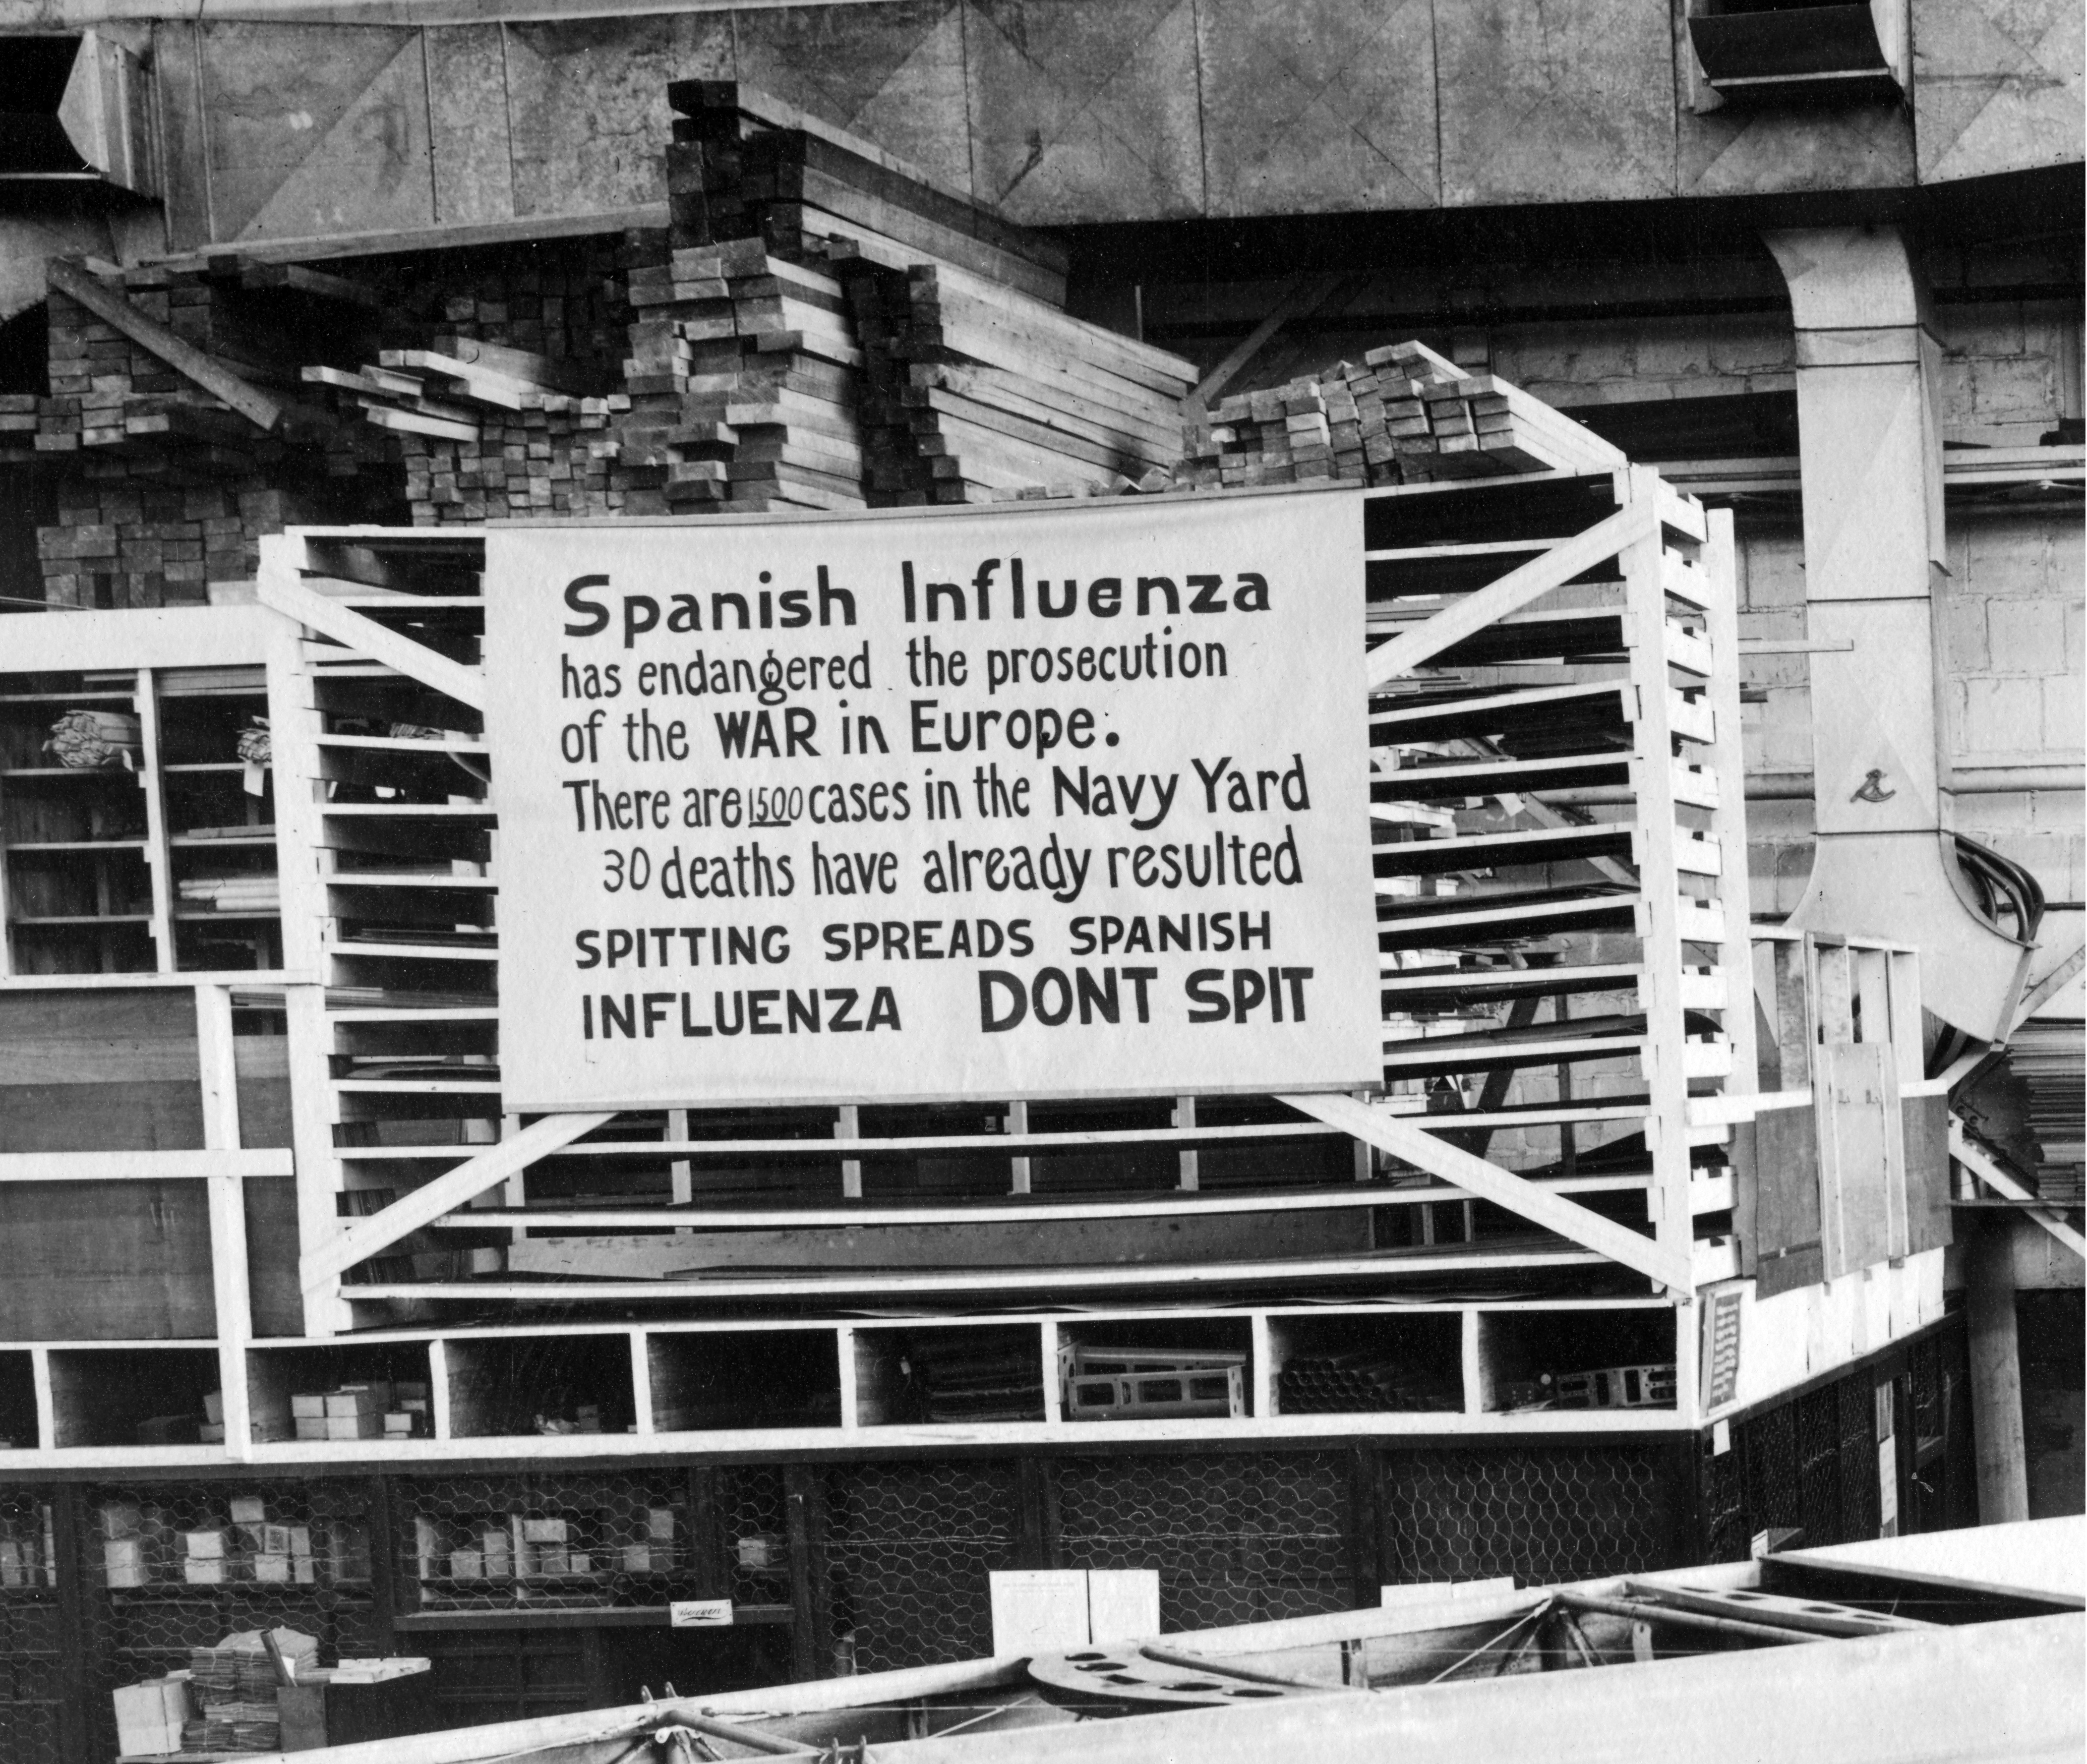 Sign reads: Spanish influenza has endangered the prosecution of the WAR in Europe. There are 1500 cases in the Navy Yard. 30 deaths have already resulted. Spitting spreads Spanish influenza don't spit